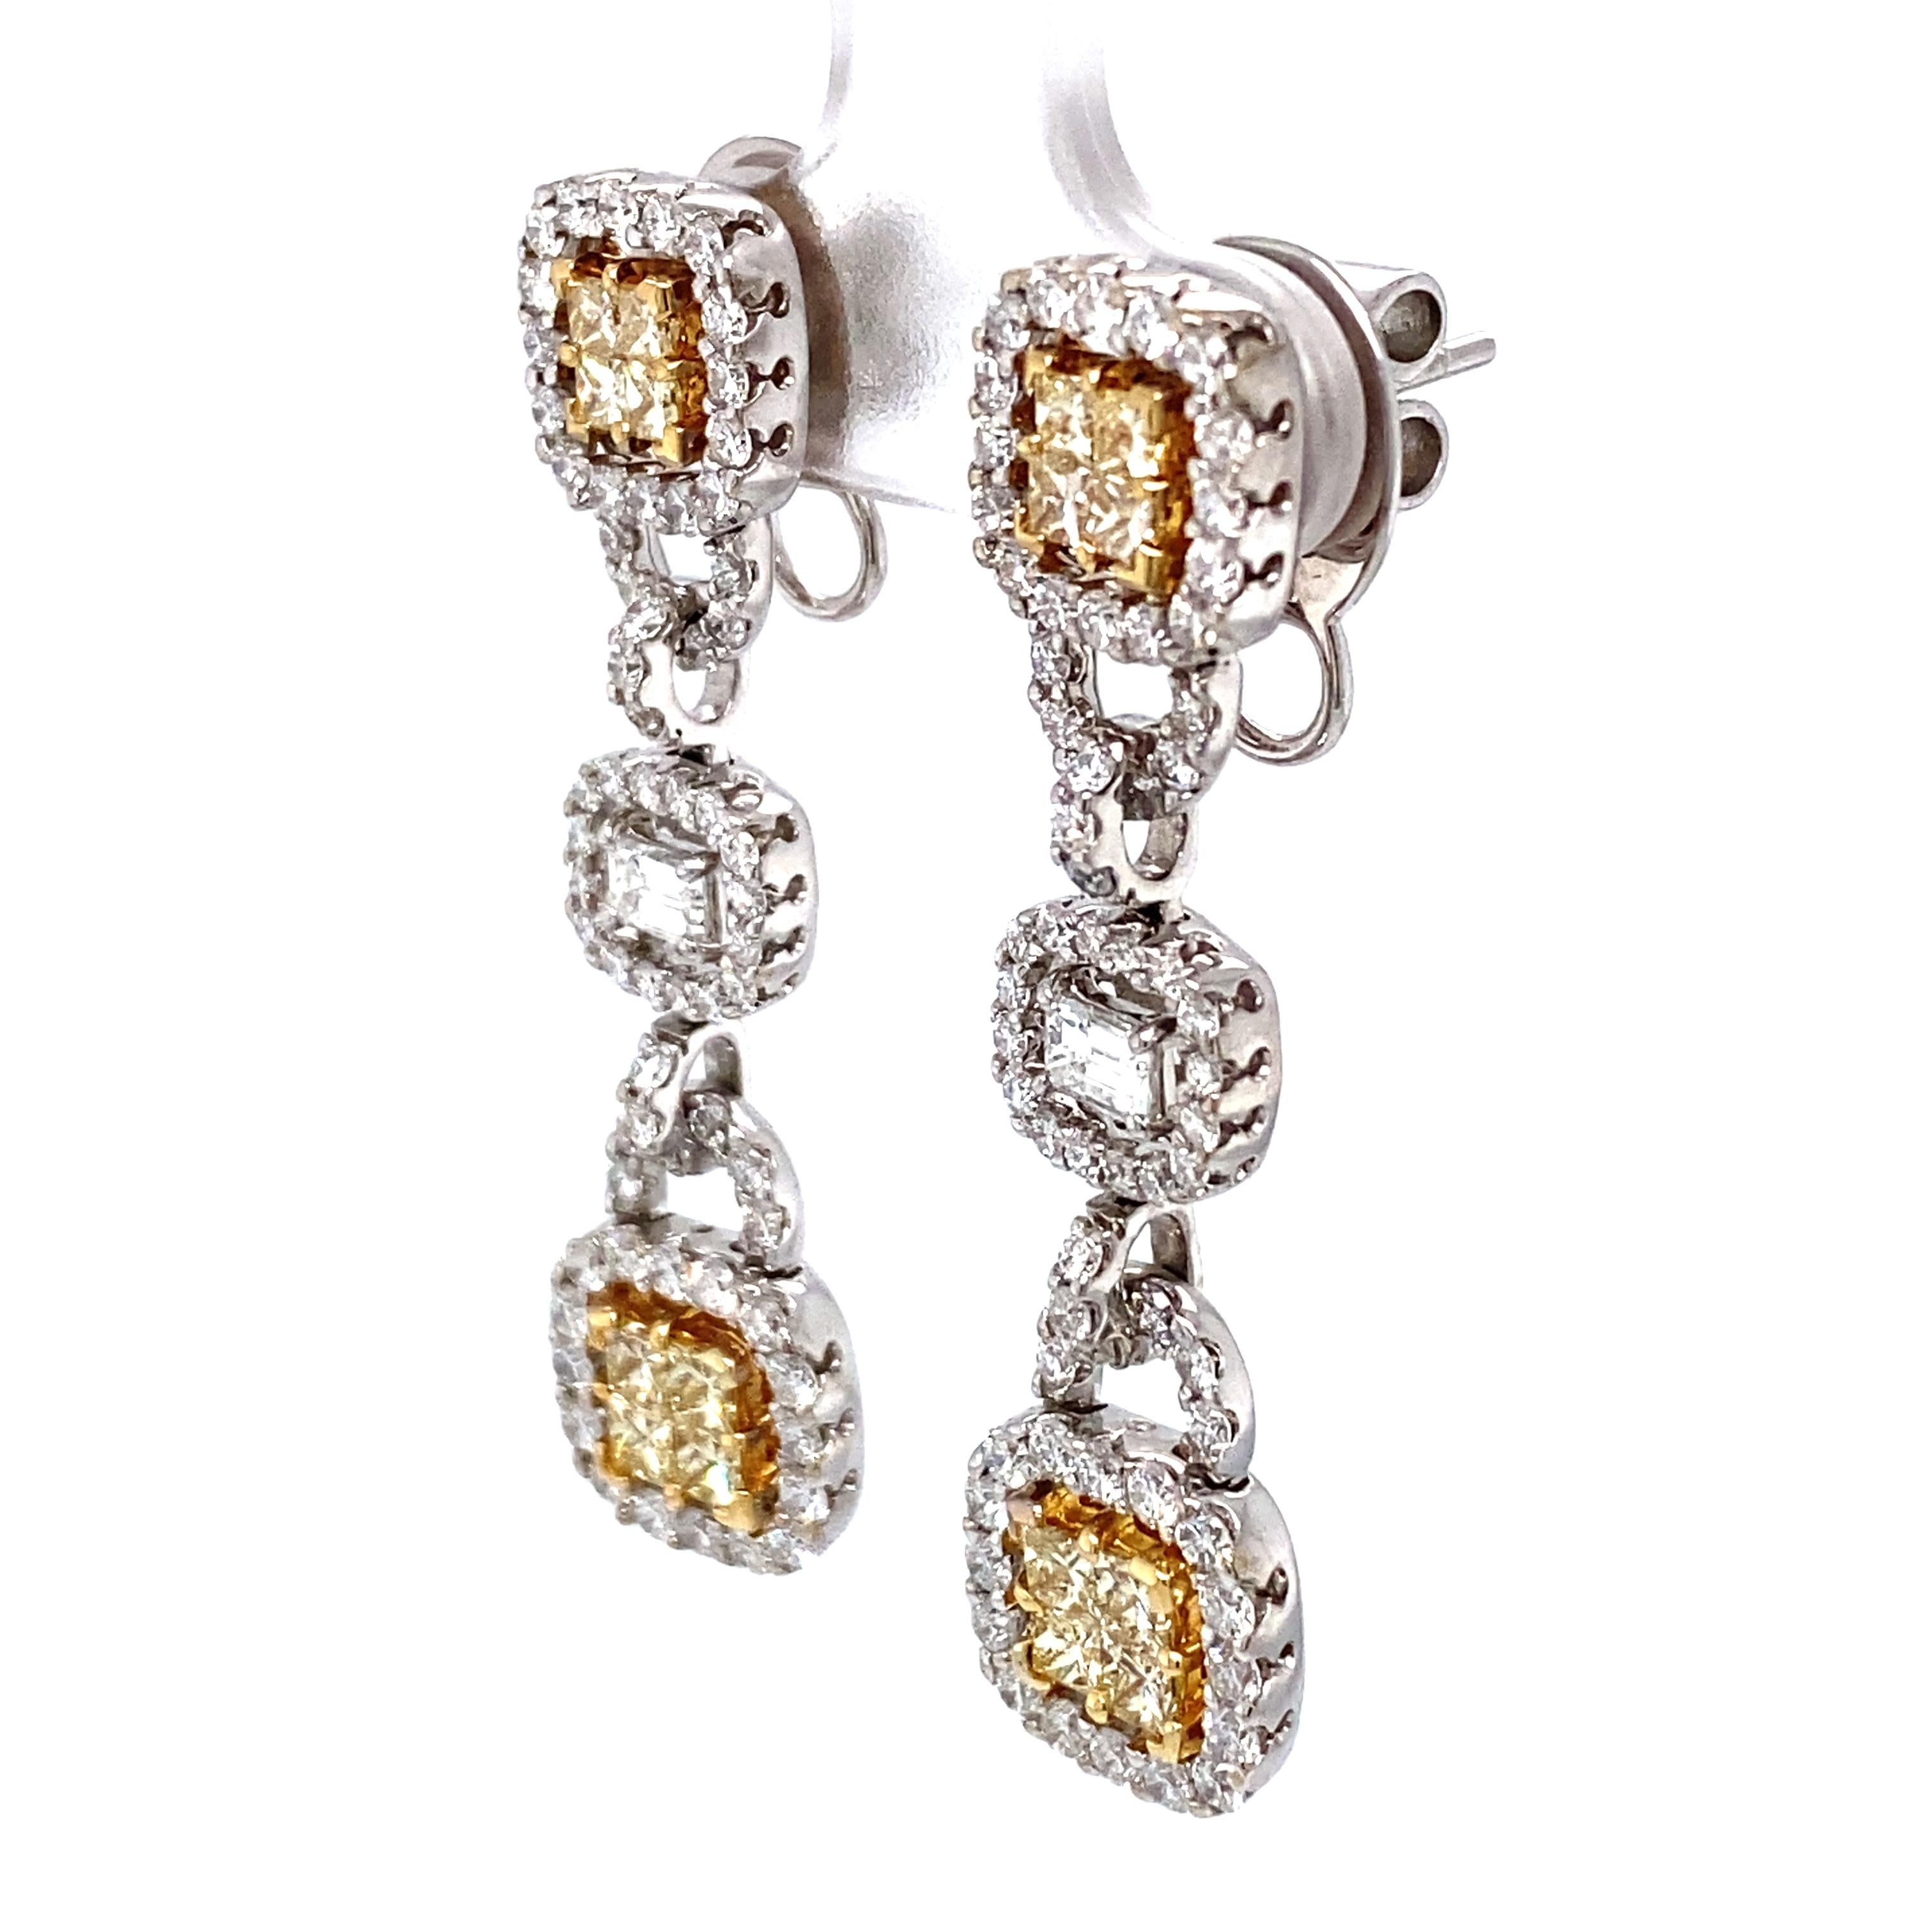 3 Carat White and Yellow Diamond Dangle Earrings in 18 Karat White Gold In Excellent Condition For Sale In Atlanta, GA